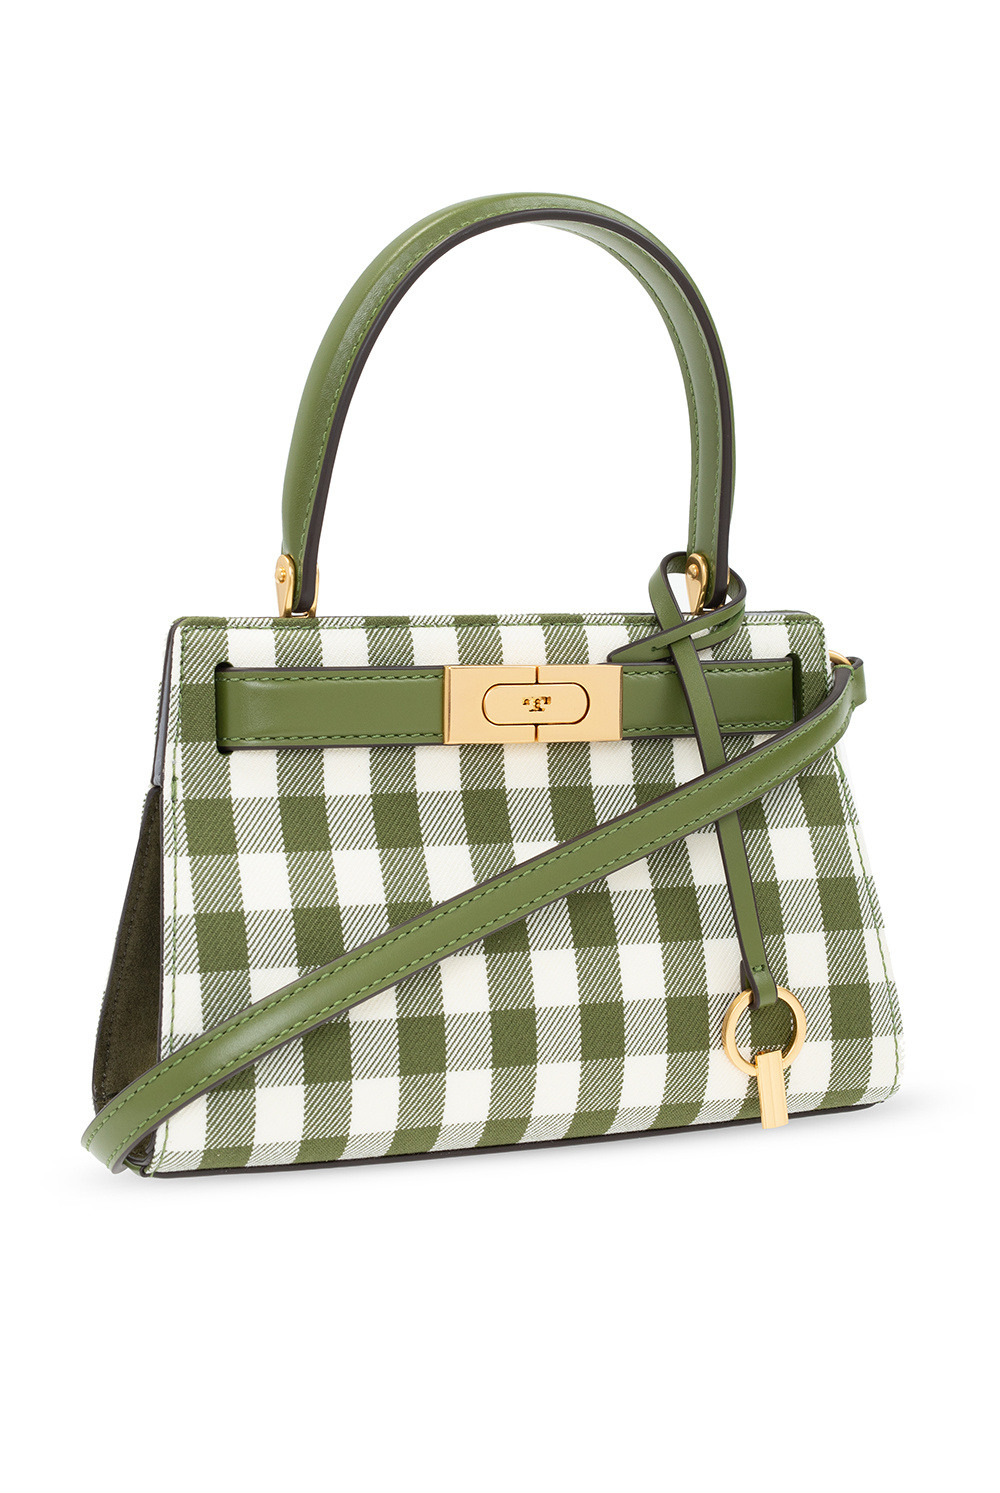 Pre-owned Tory Burch Women's Tote Bags